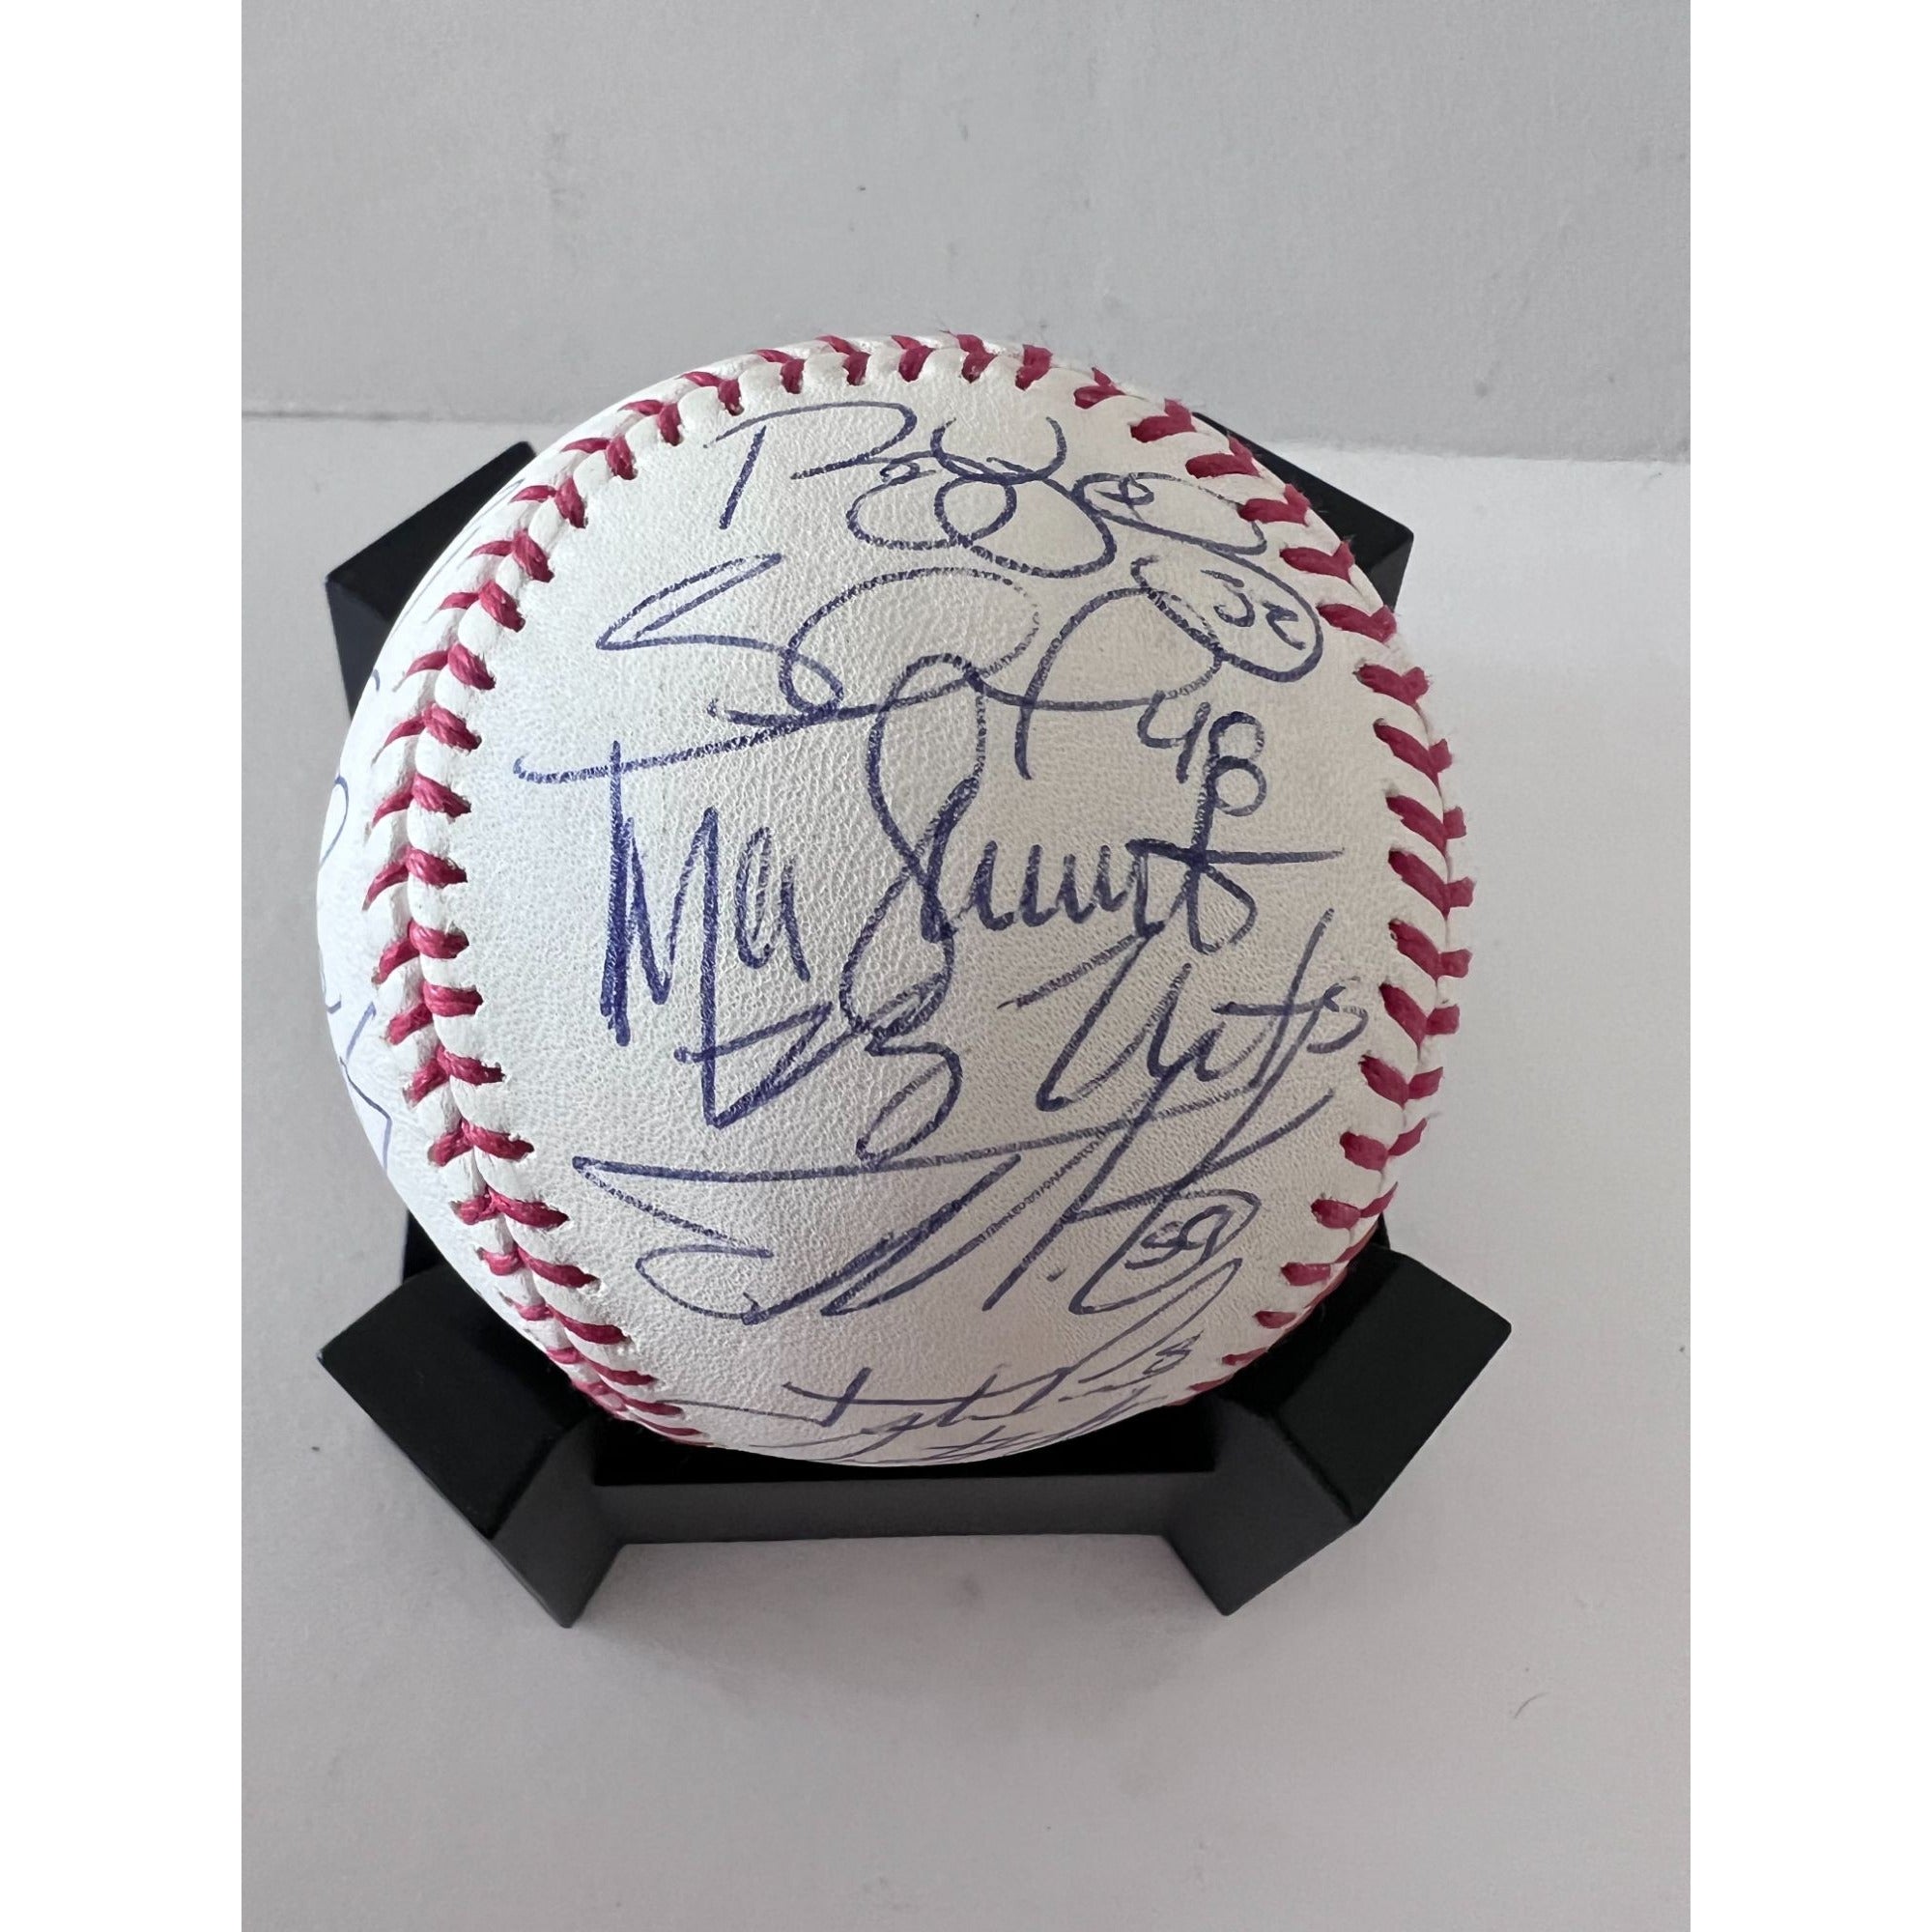 Buster Posey Bruce Bochy Tim Lincecum 2012 San Francisco Giants World Series champions team signed Rawlings commemorative baseball with proo